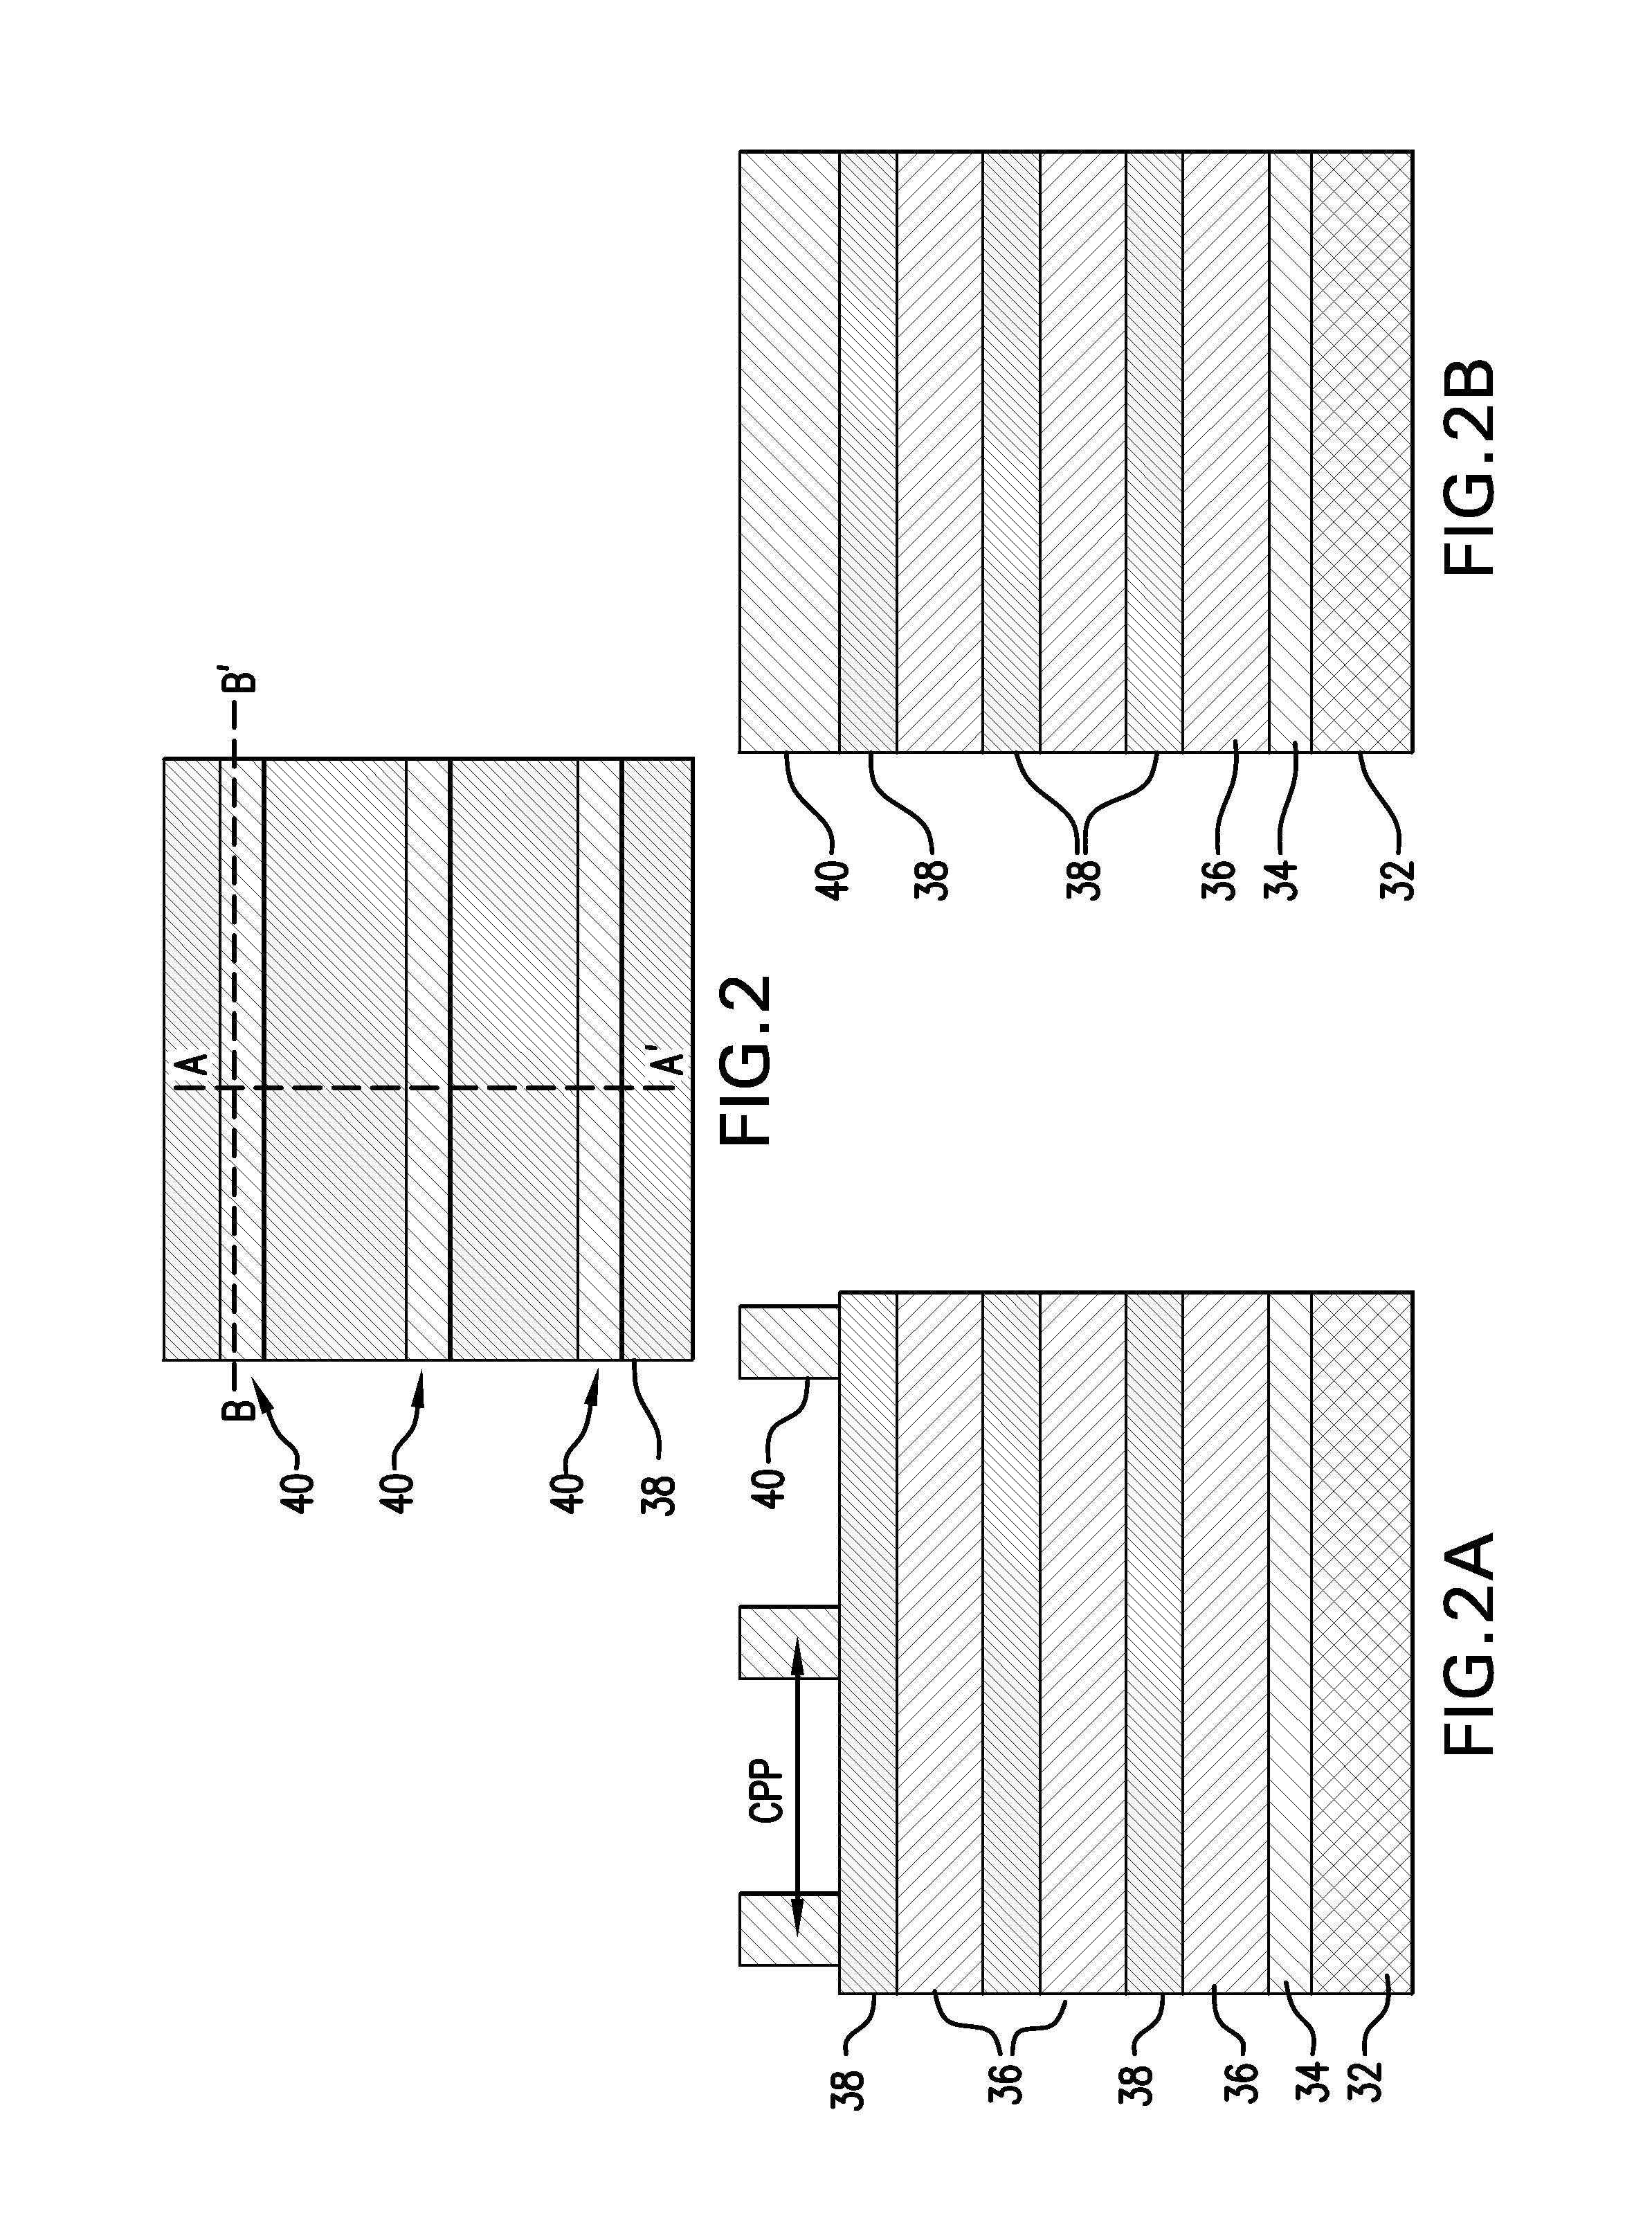 Nanowire transistor structures with merged source/drain regions using auxiliary pillars